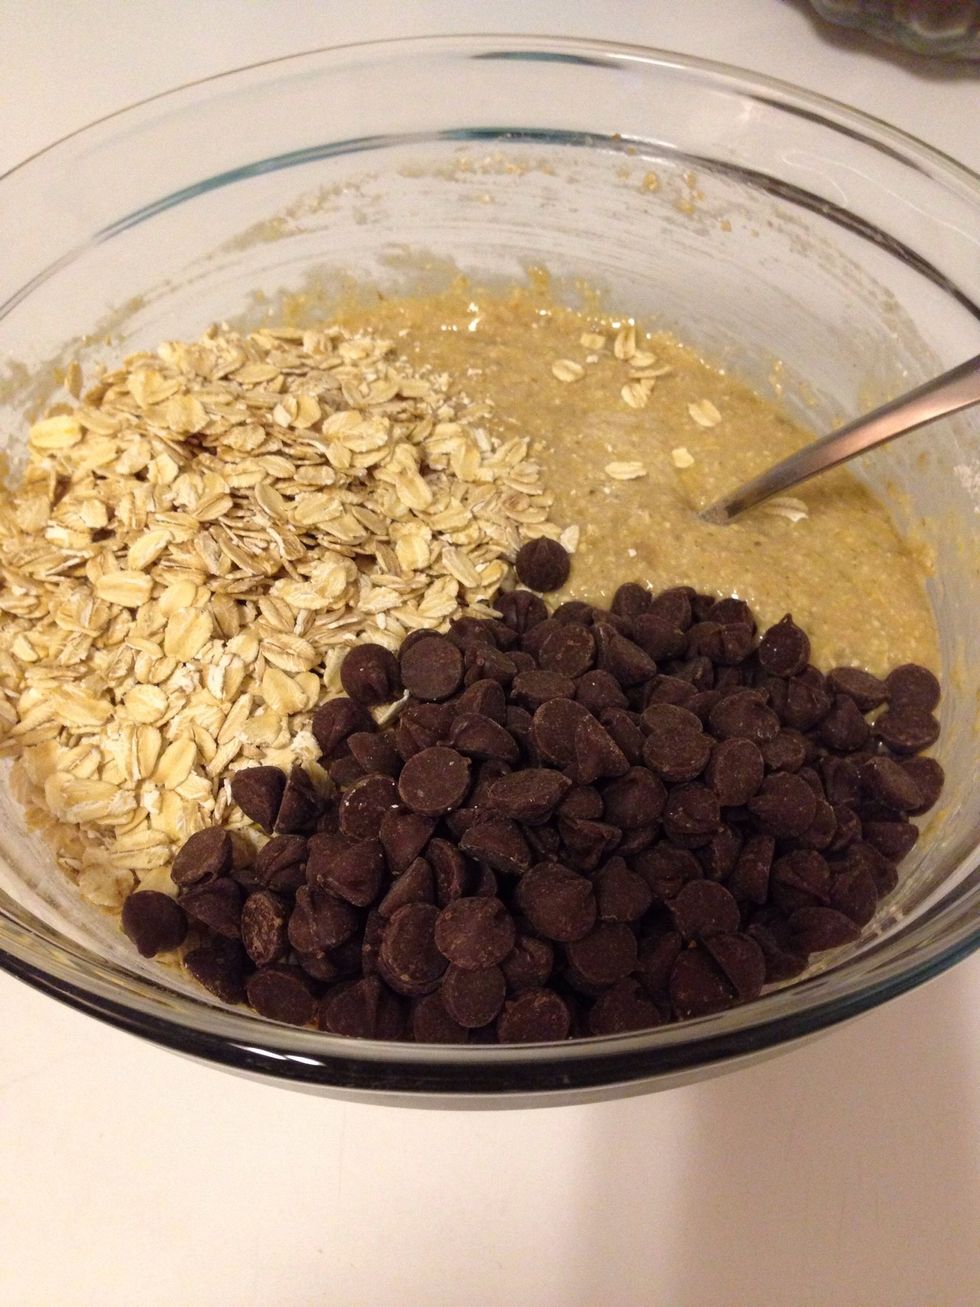 Gently stir in oats and chocolate chips until evenly combined.